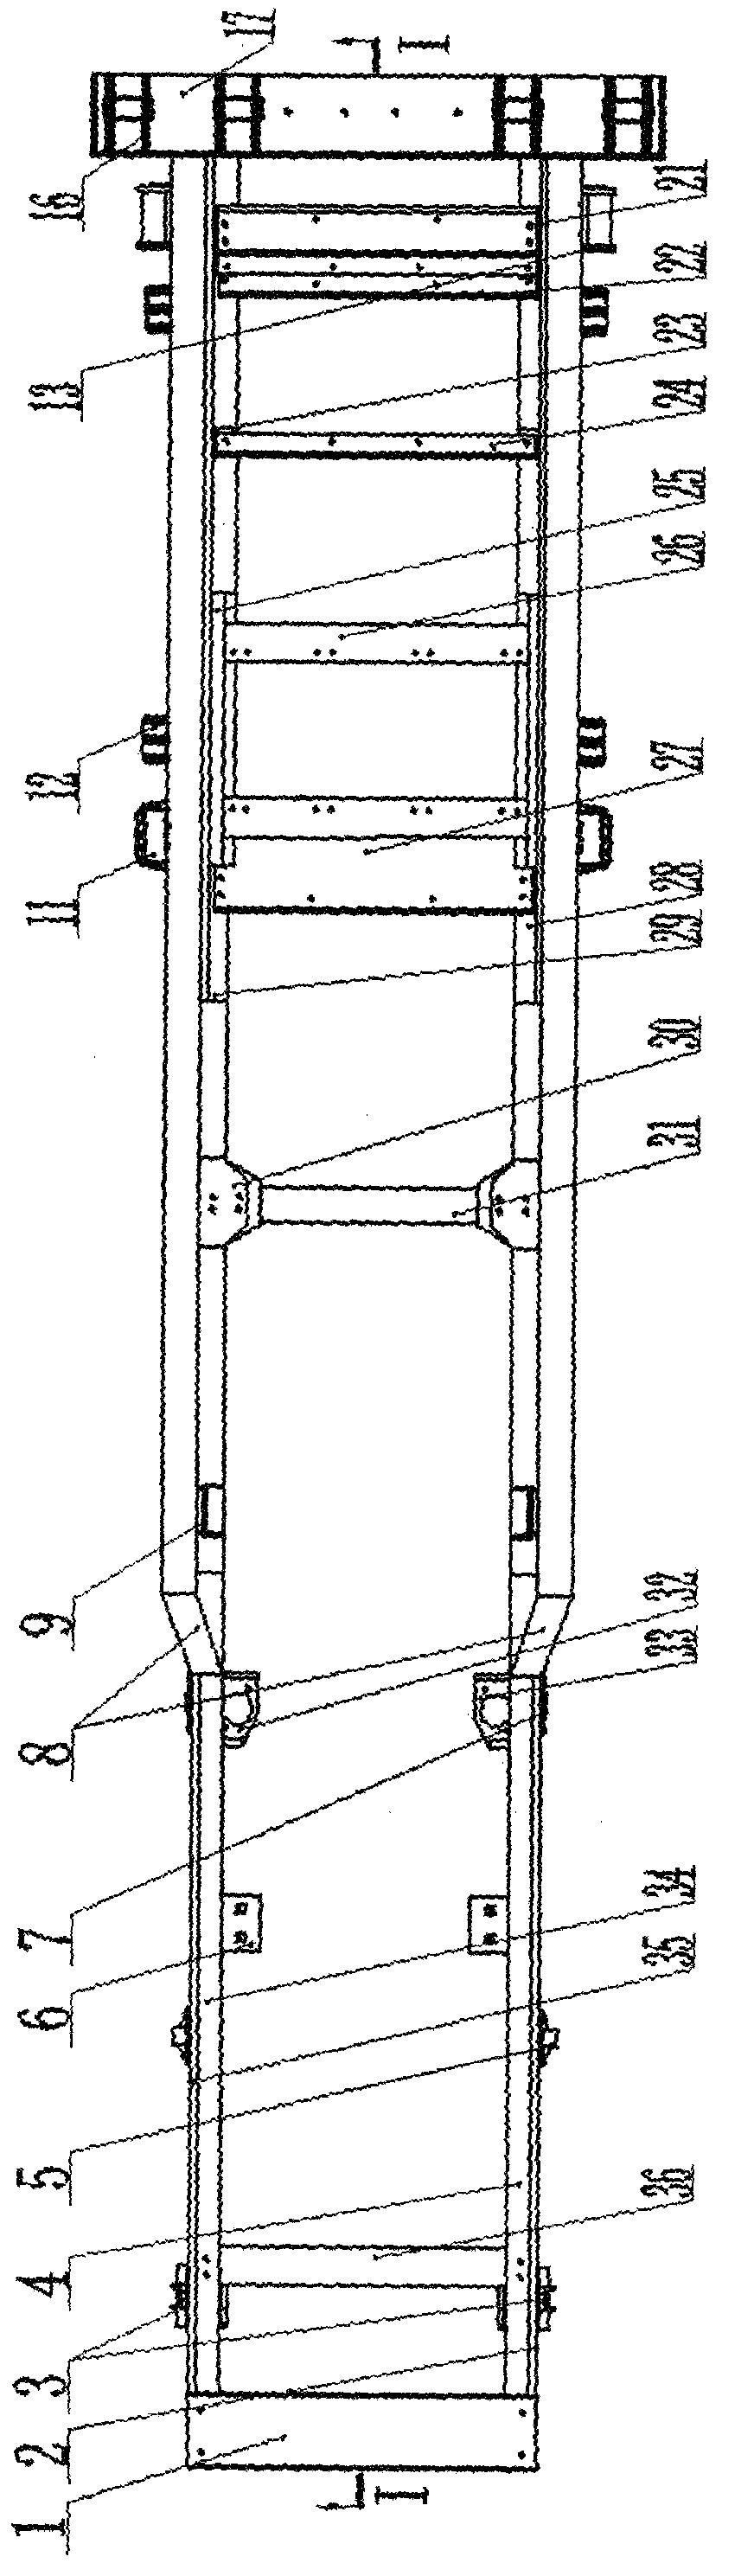 Dump truck frame with alien-shaped longitudinal beams and sub-frame function